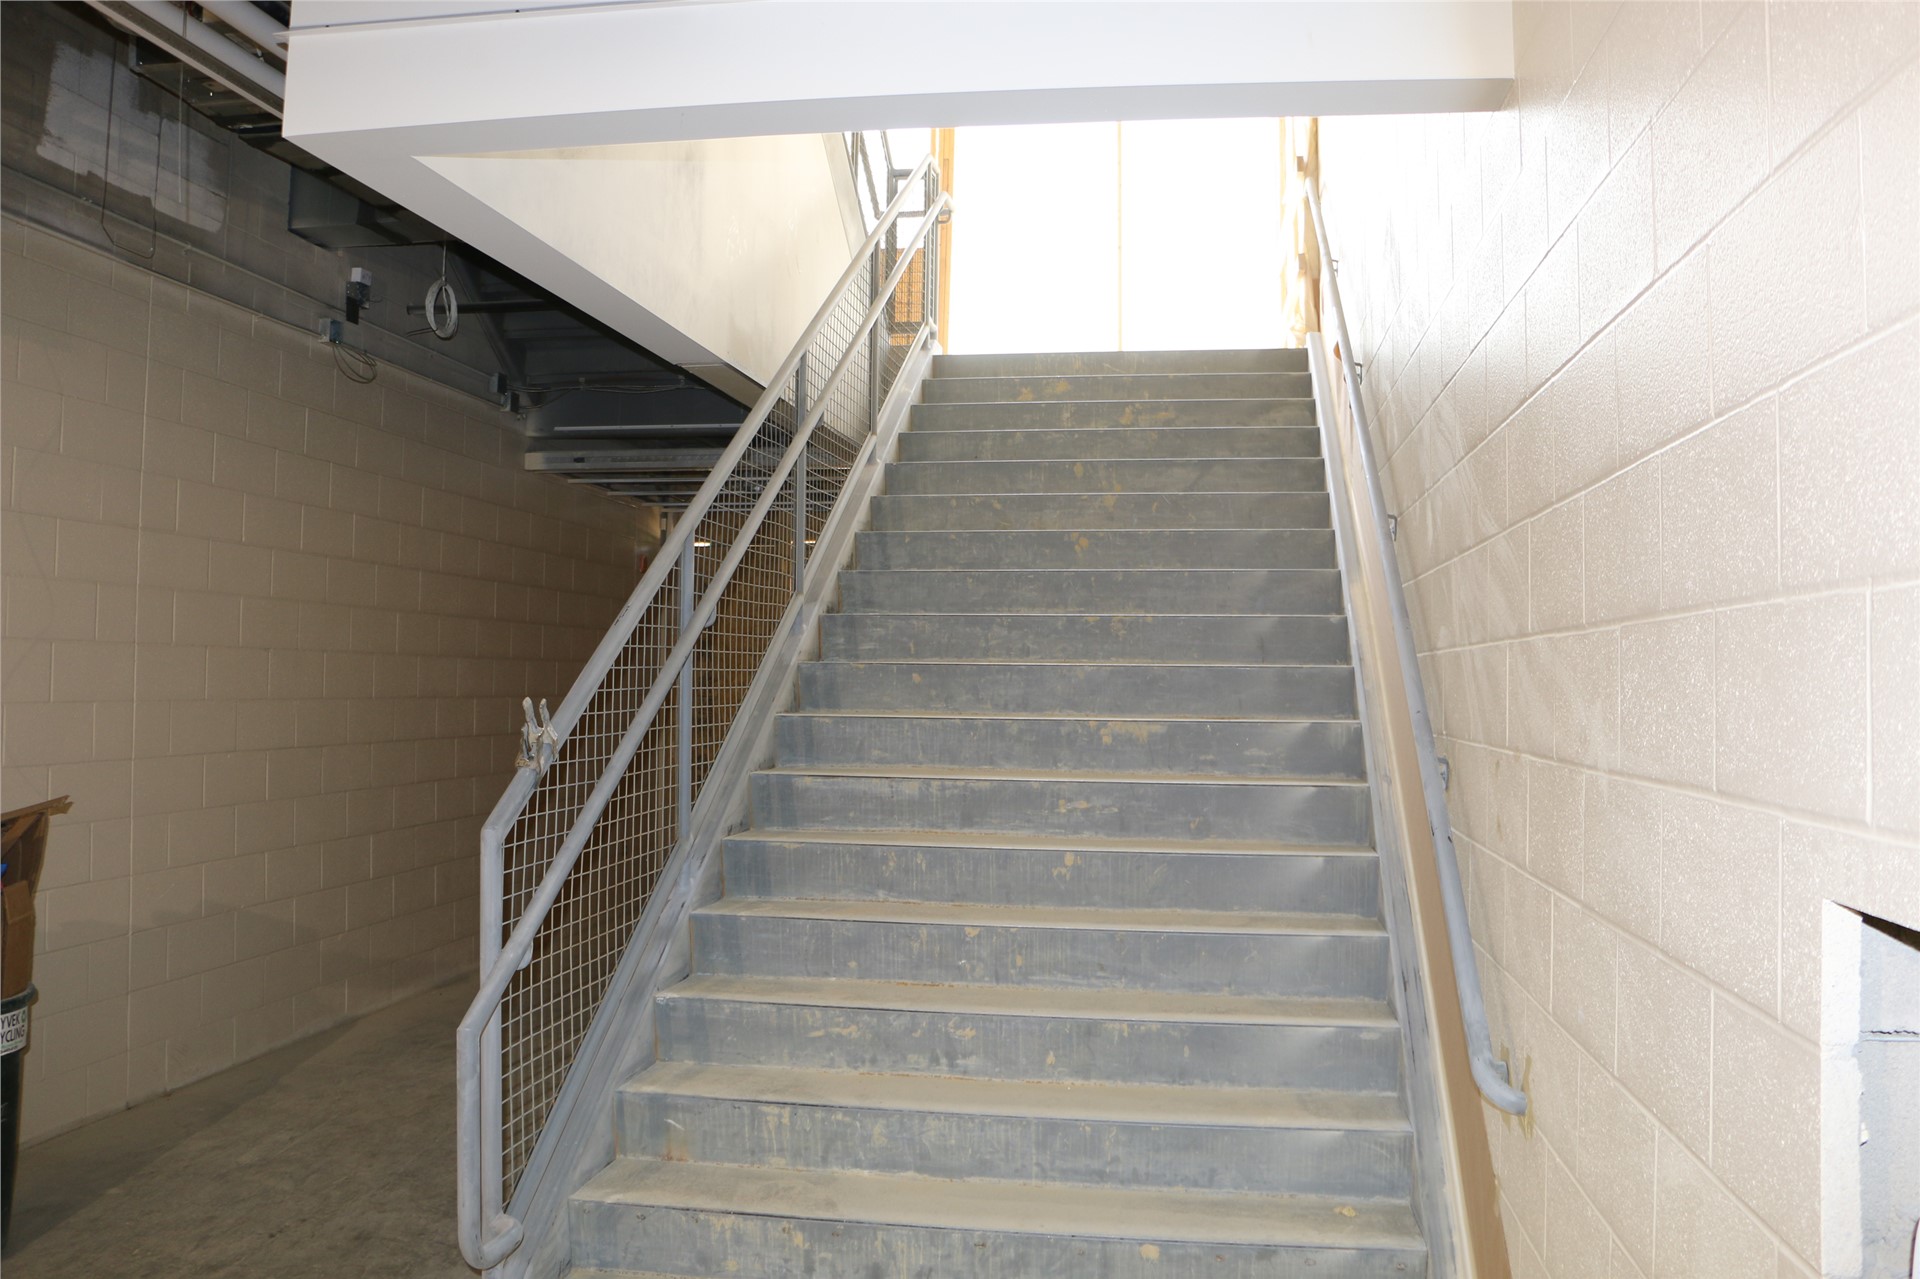 Stairs connecting the 1st and 2nd floors of the West Academic Wing